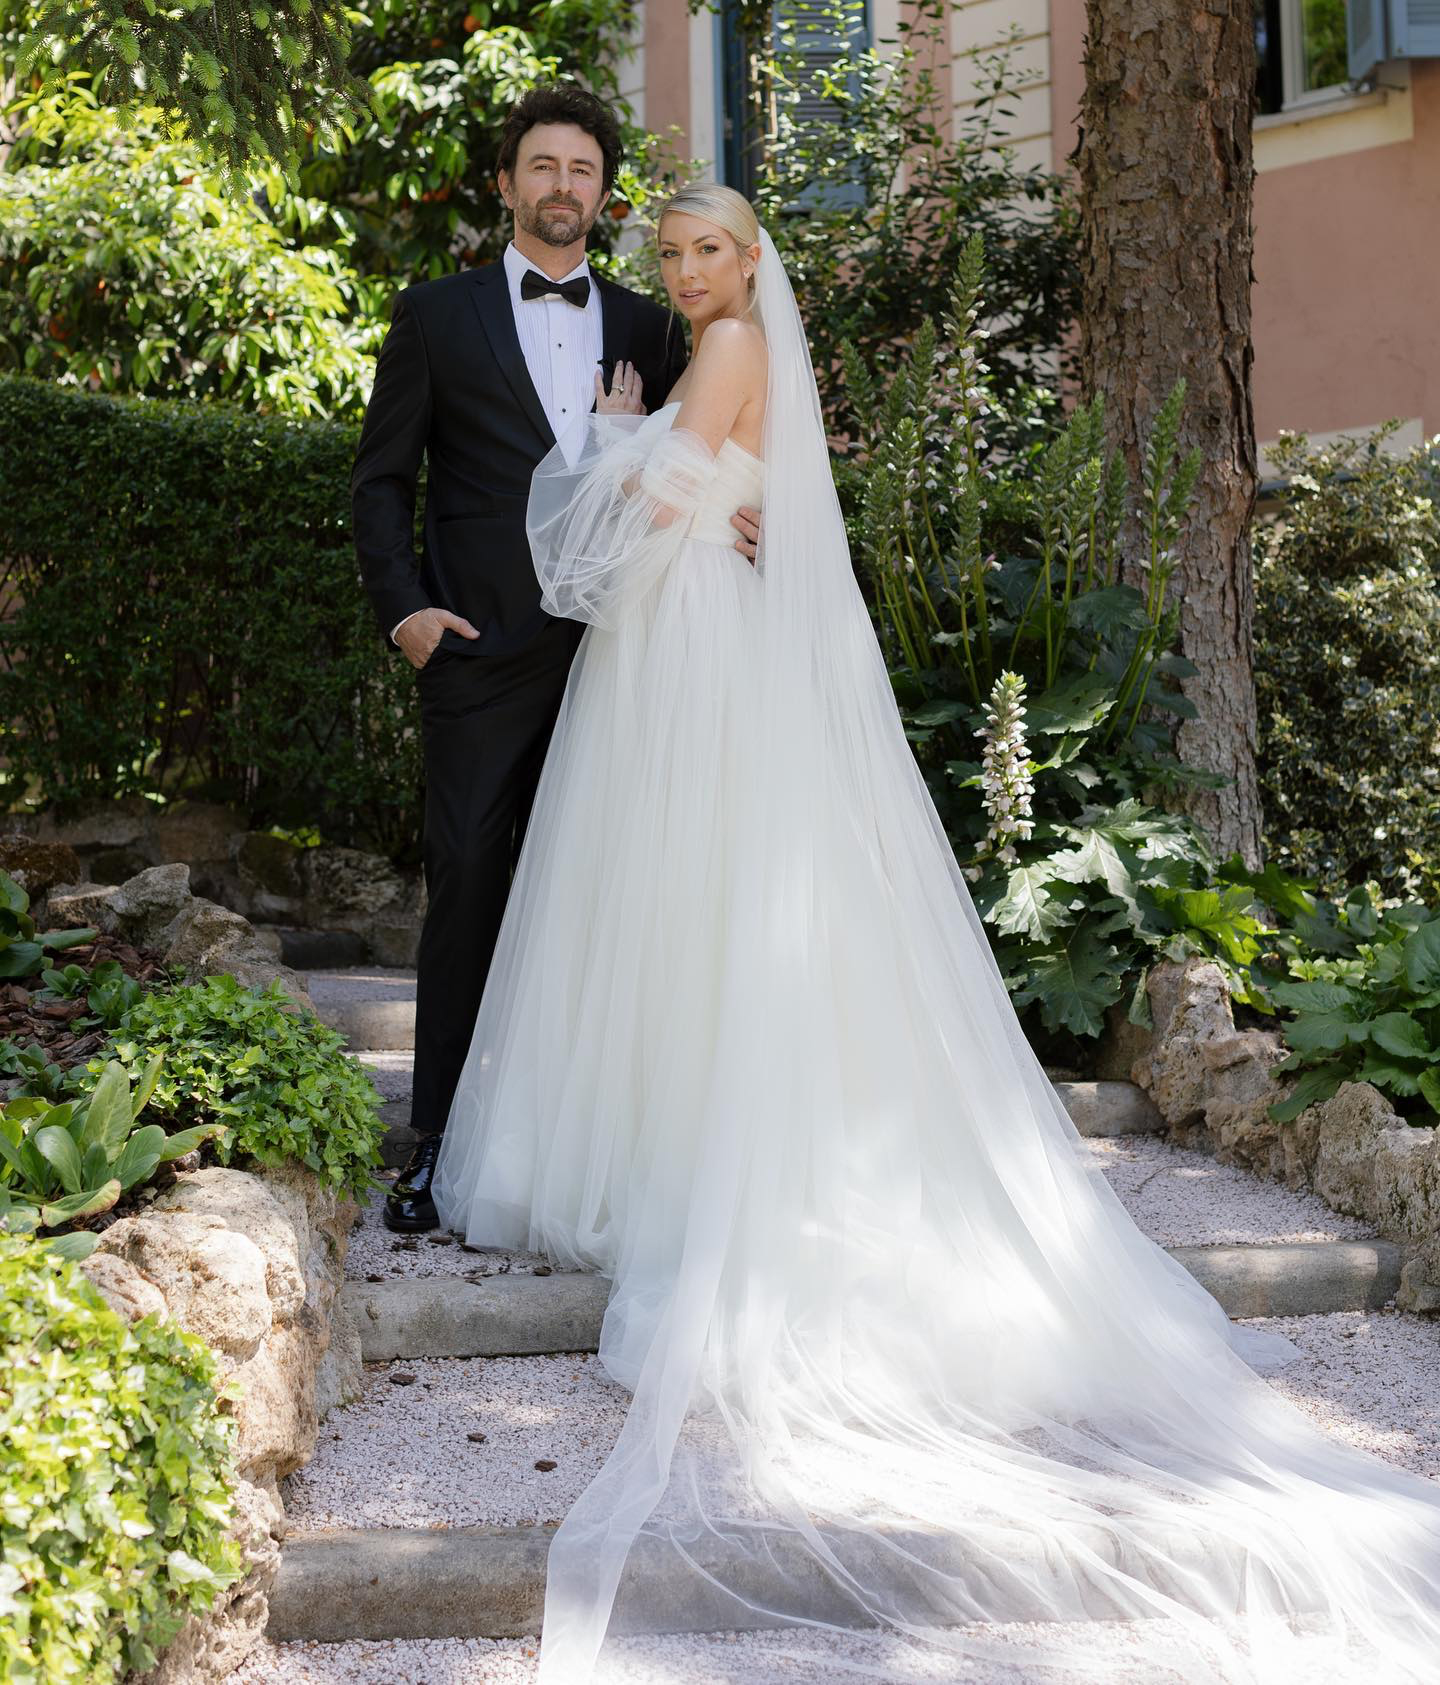 Stassi Schroeder, Beau Clark Marry for the 2nd Time in Rome photo